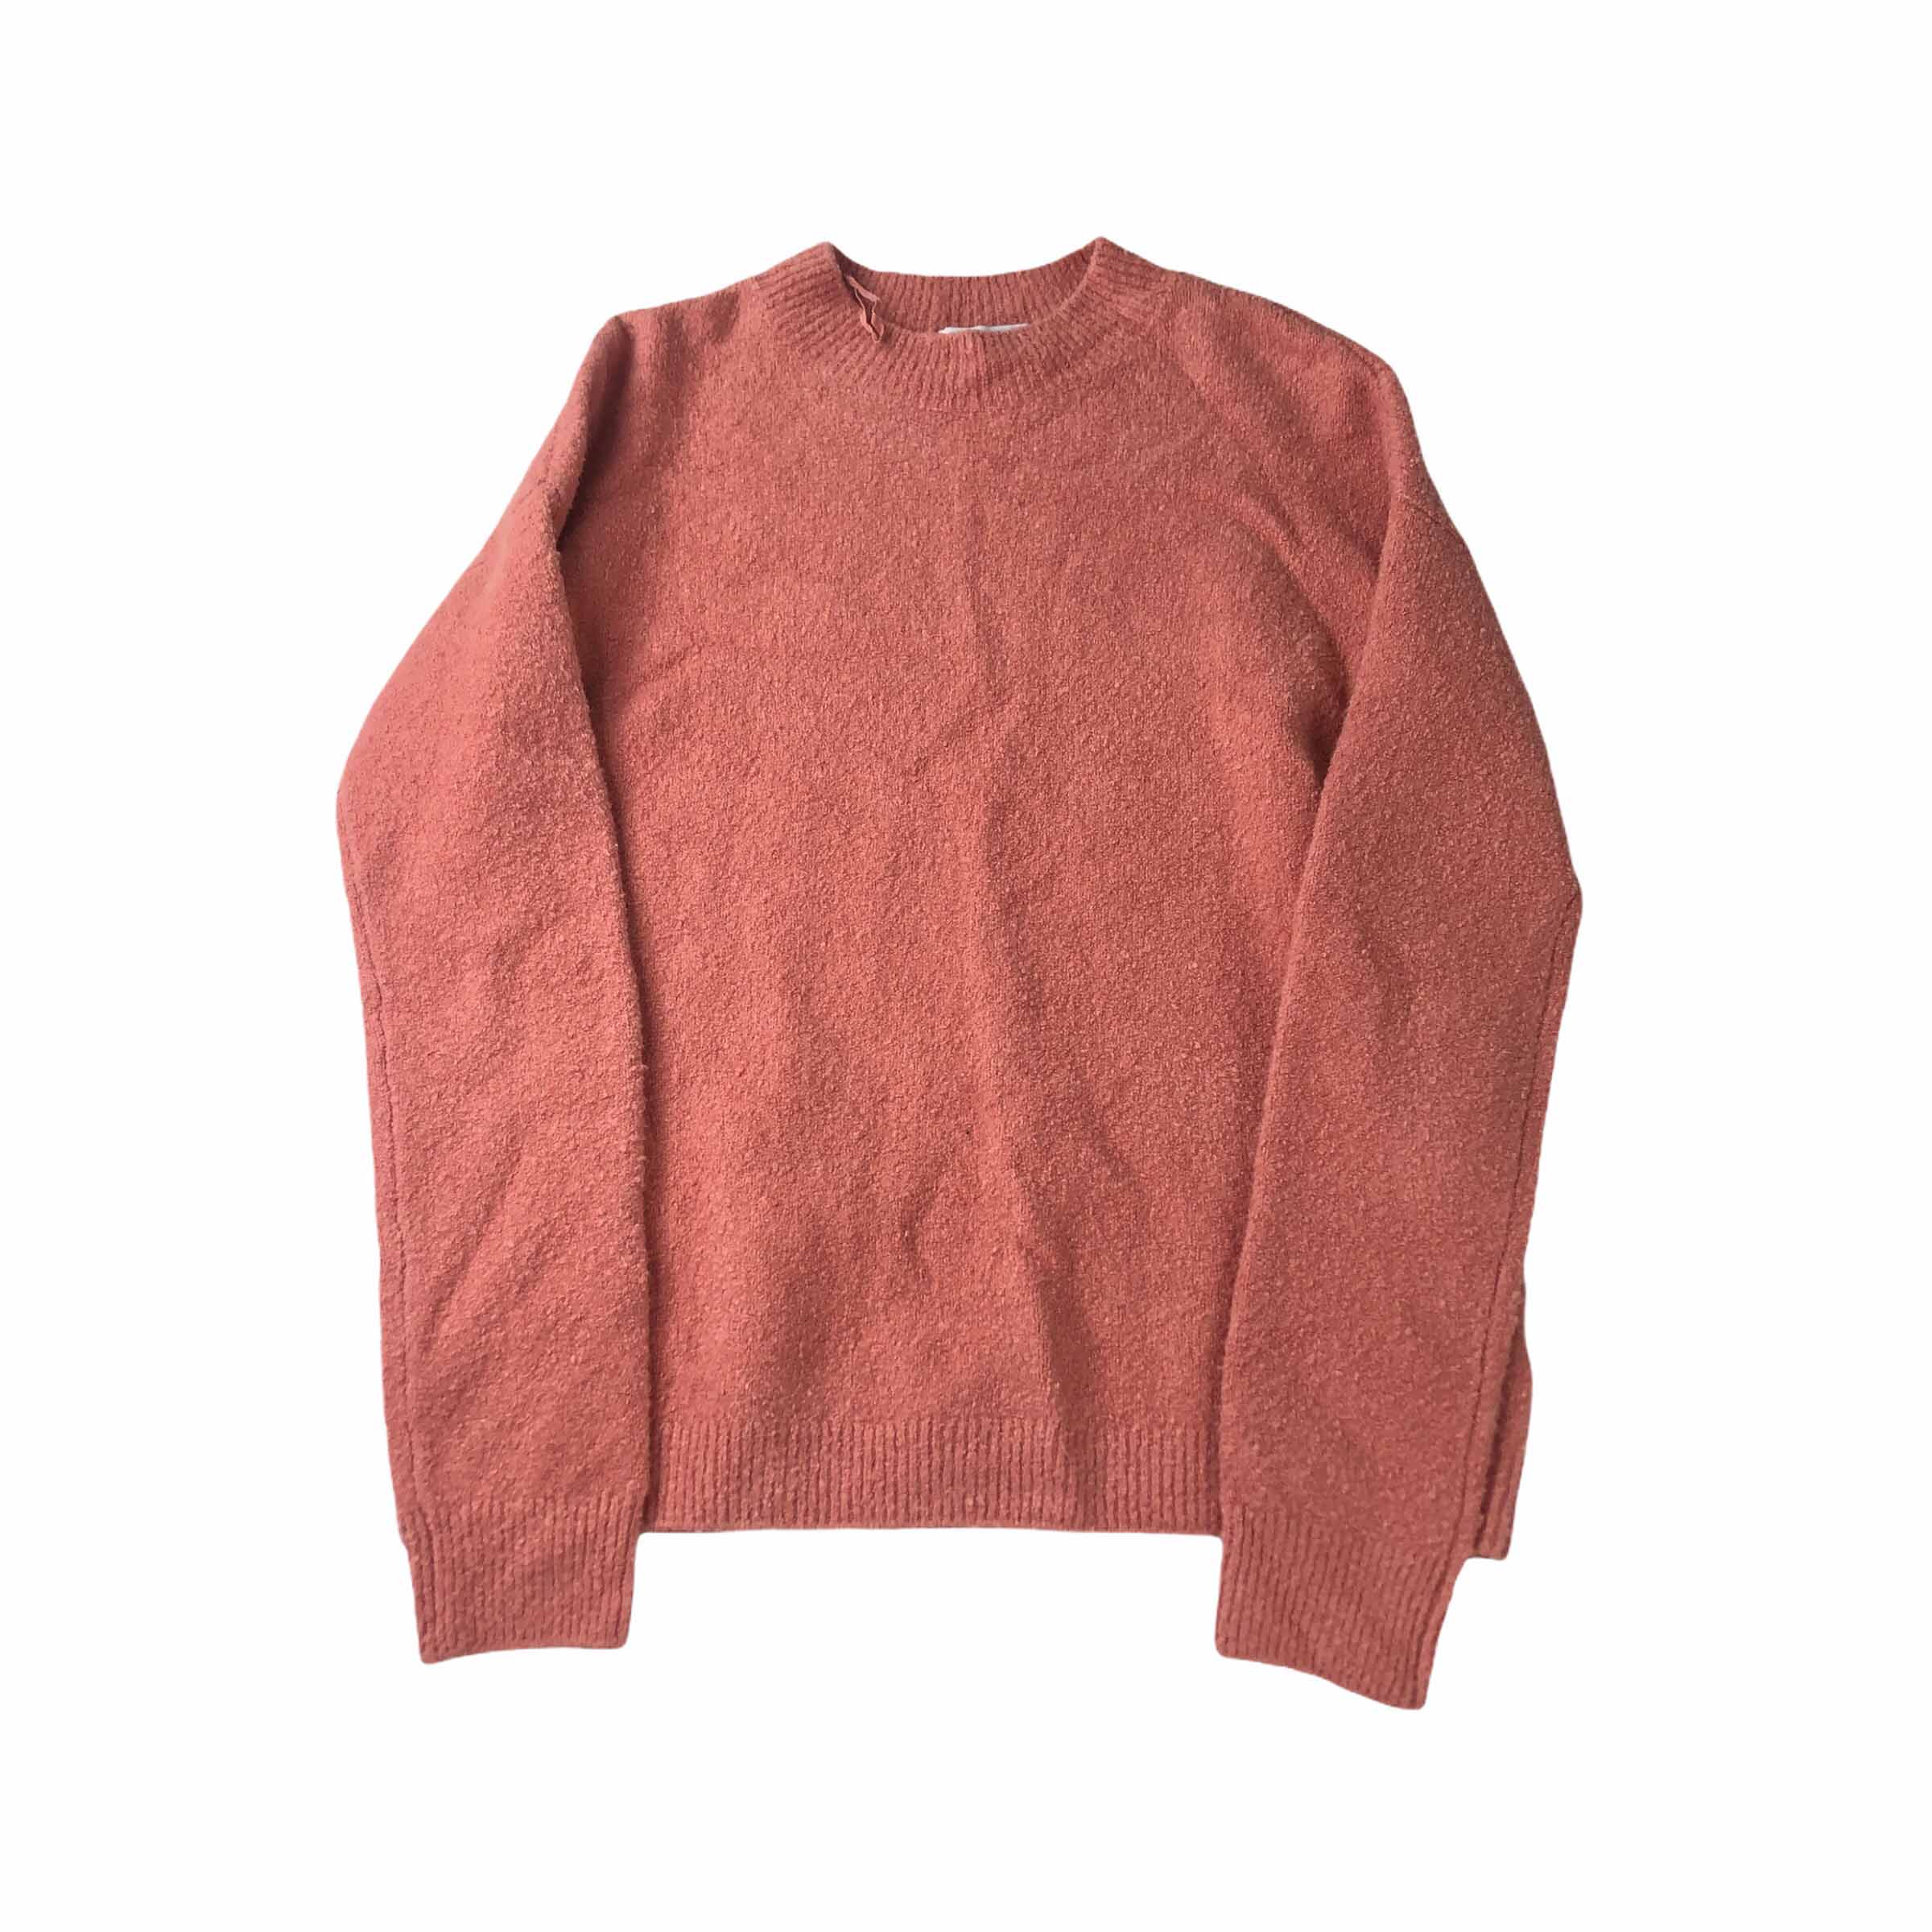 [&amp; Other Stories] Knit Sweater PK - Size S